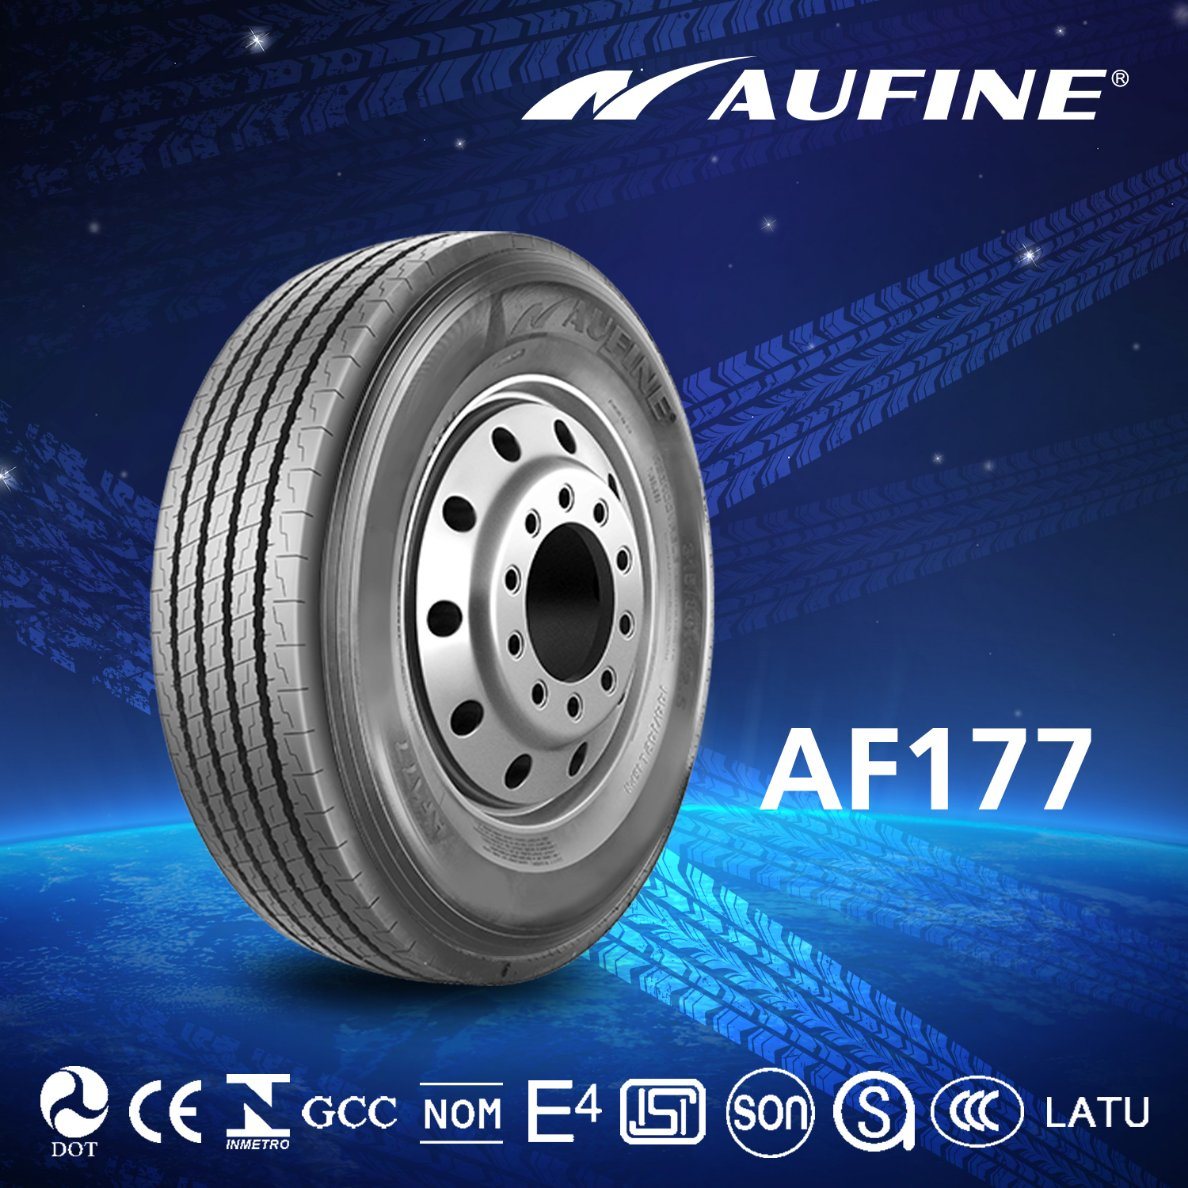 Aufine Truck Tire with High Quality for Your Reference